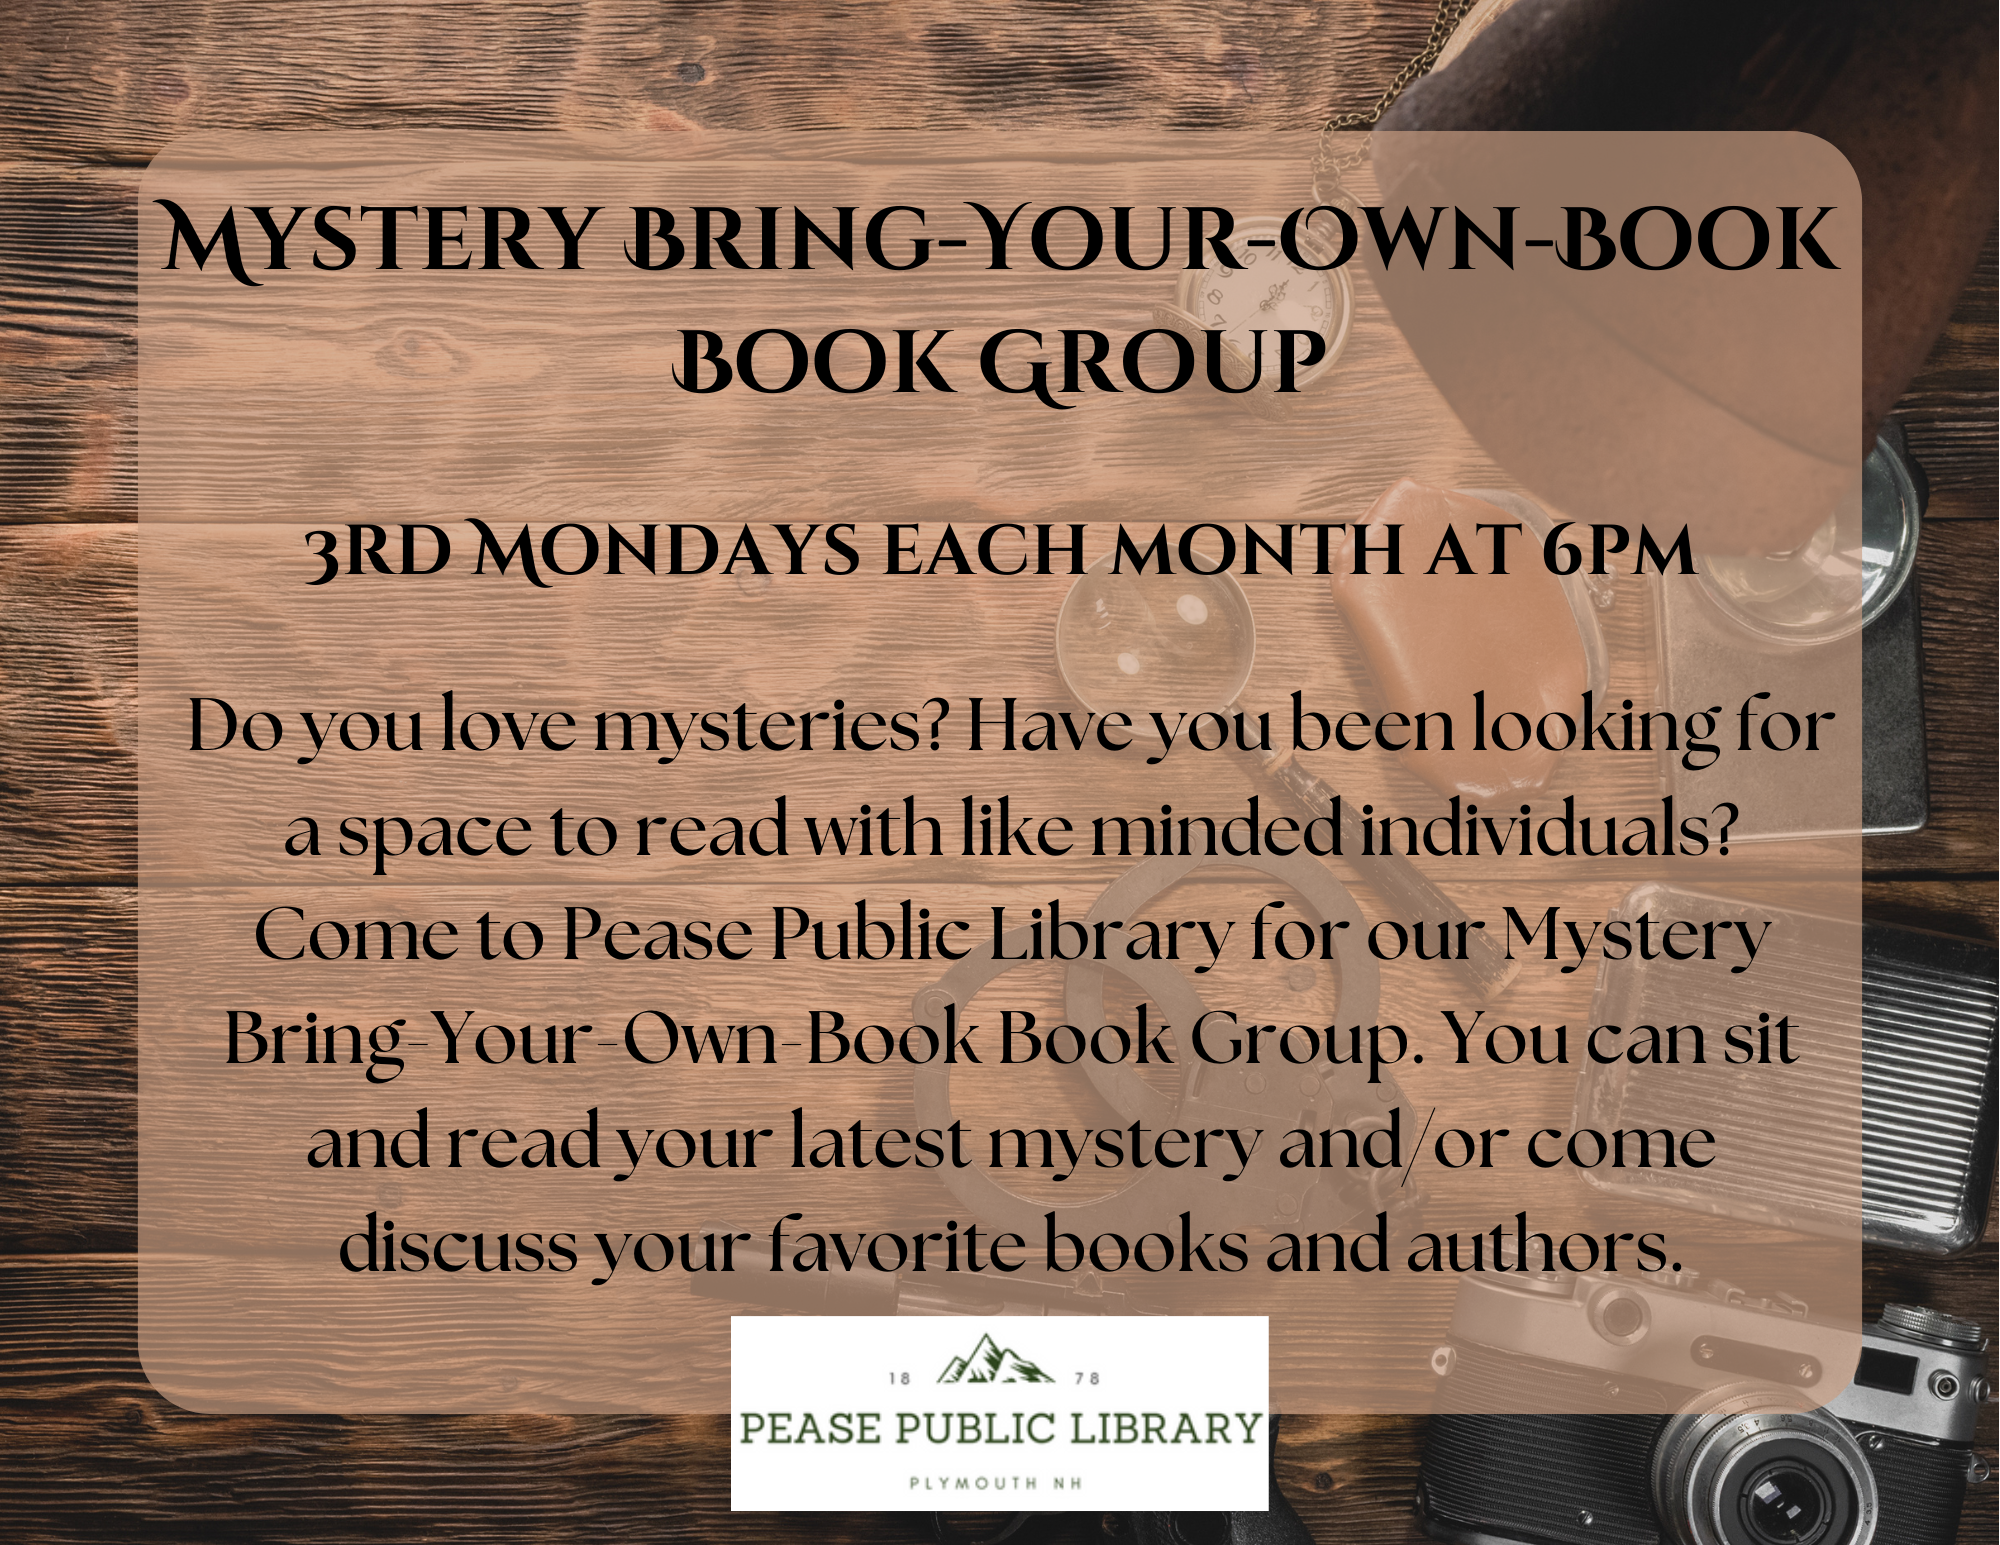 Do you love mysteries? Have you been looking for a space to read with like minded individuals? Come to Pease Public Library for our Mystery Bring-Your-Own-Book Book Group on the 3rd Monday of every month at 6PM. You can sit and read your latest mystery and/or come discuss your favorite books and authors.